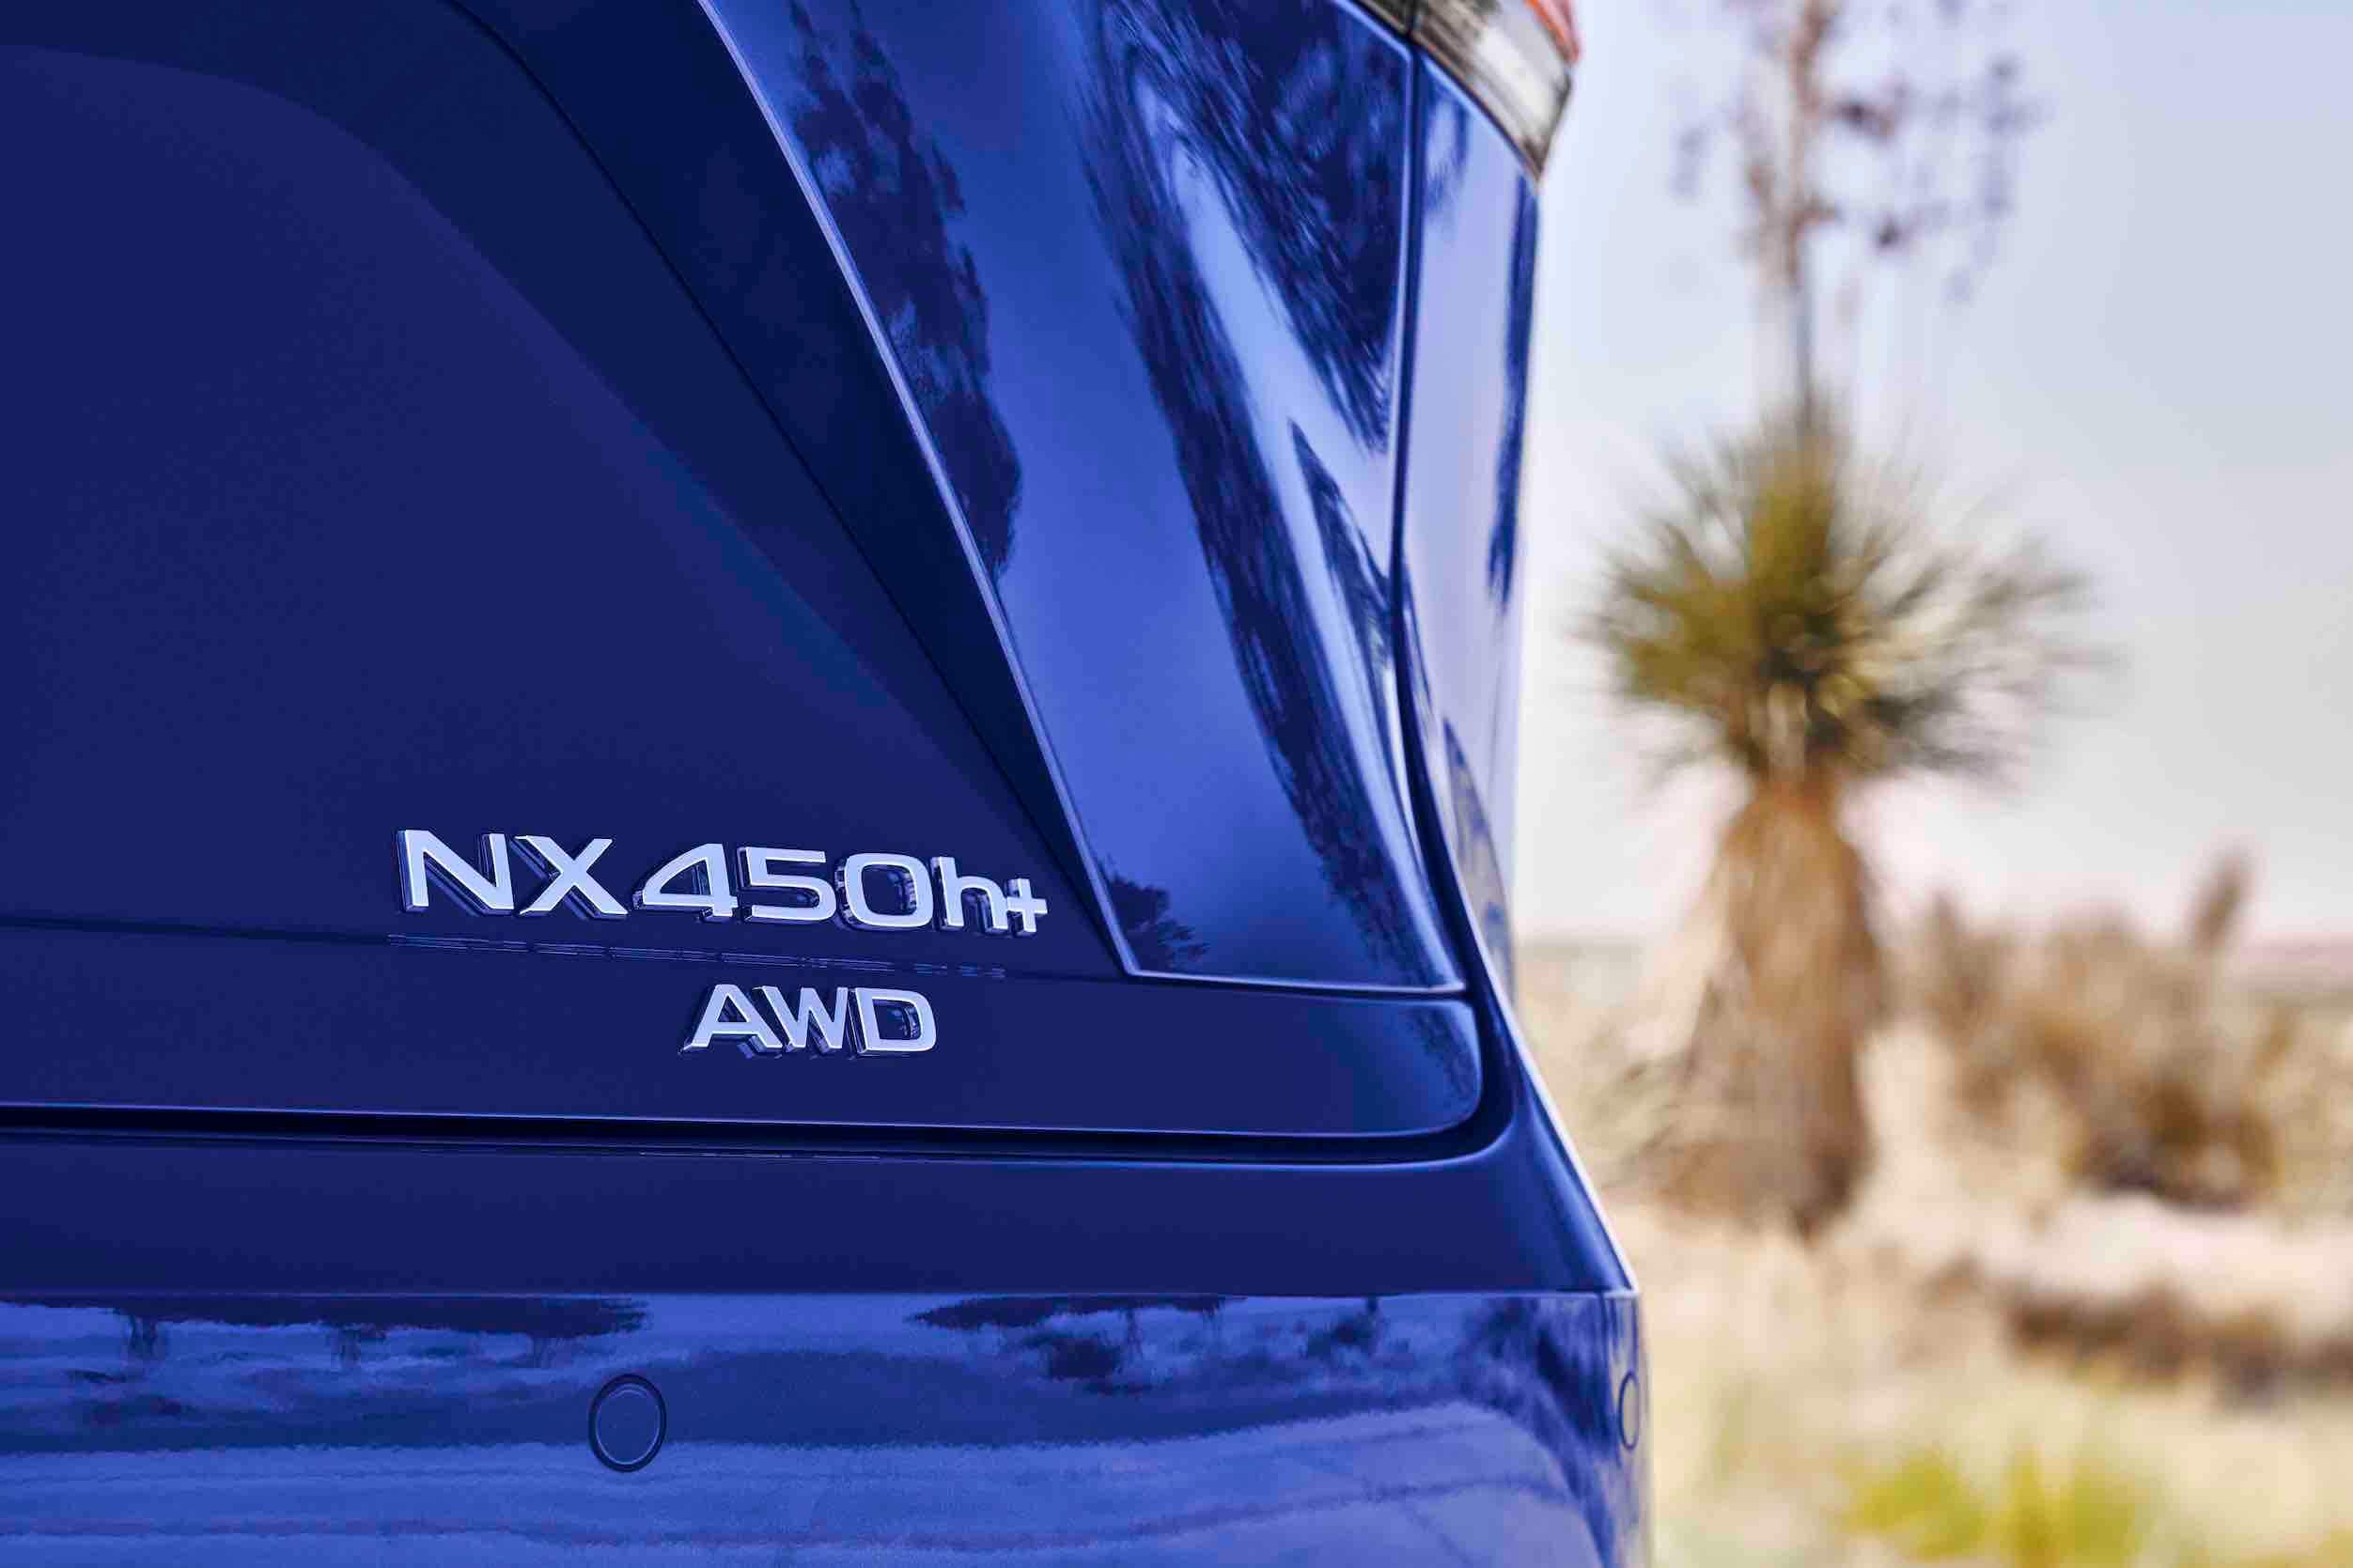 The 2023 Lexus NX 450h+ rear badge in blue already looks good, and the 2024 model that's pictured will take it to another level.